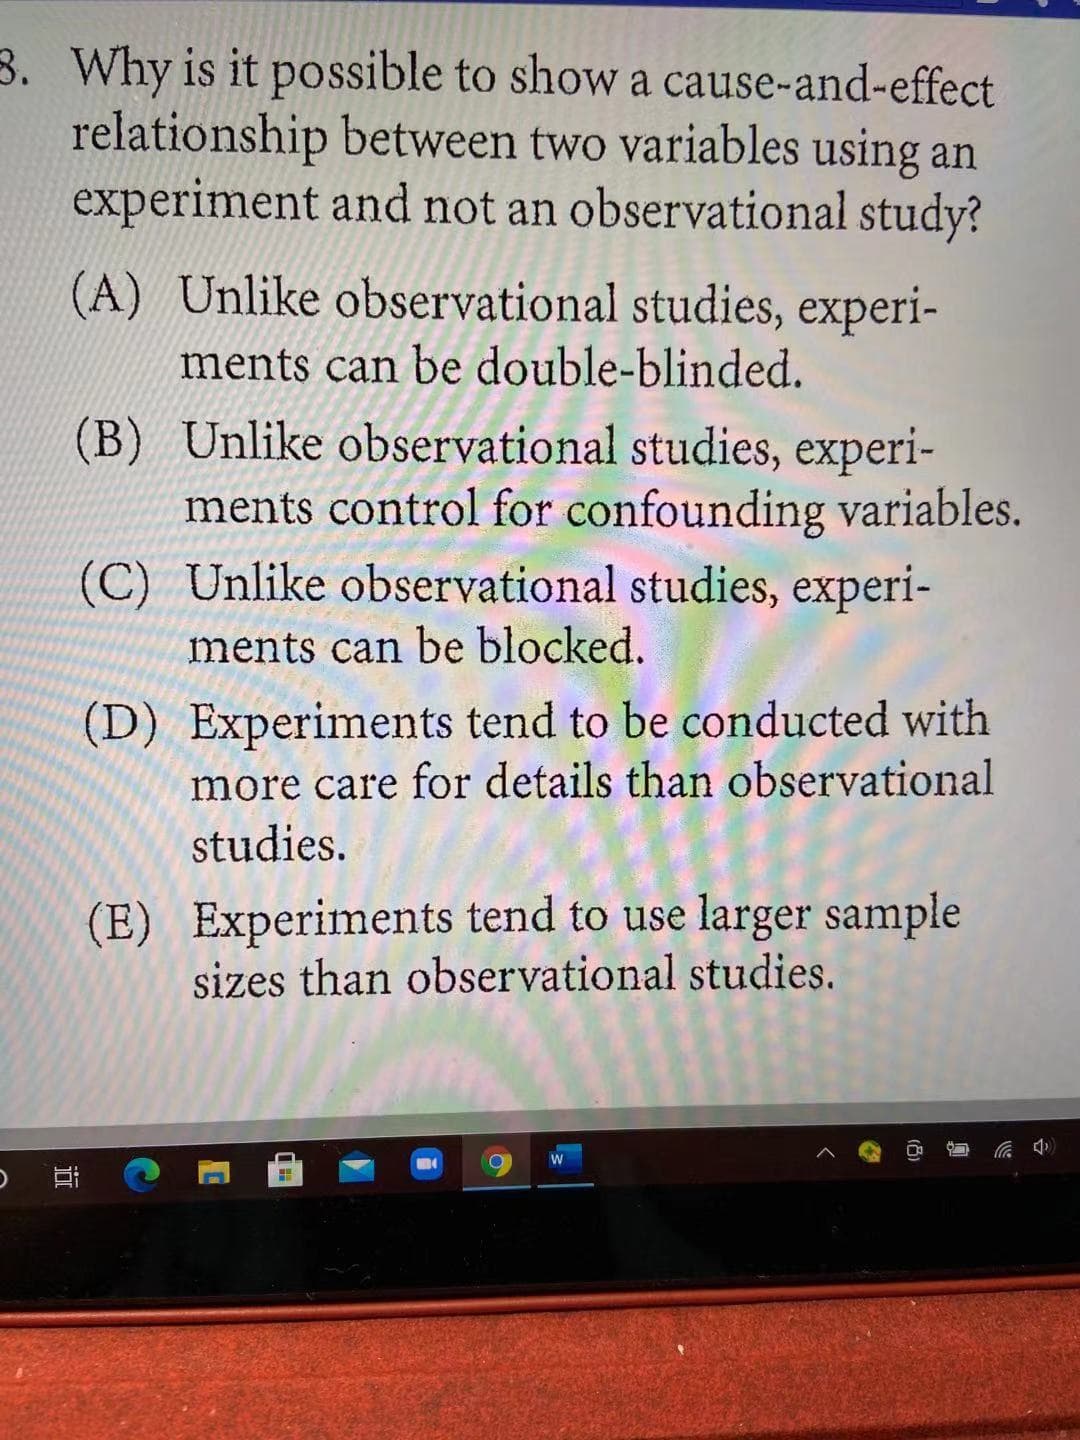 3. Why is it possible to show a cause-and-effect
relationship between two variables using an
experiment and not an observational study?
(A) Unlike observational studies, experi-
ments can be double-blinded.
(B) Unlike observational studies, experi-
ments control for confounding variables.
(C) Unlike observational studies, experi-
ments can be blocked.
(D) Experiments tend to be conducted with
more care for details than observational
studies.
(E) Experiments tend to use larger sample
sizes than observational studies.
近
